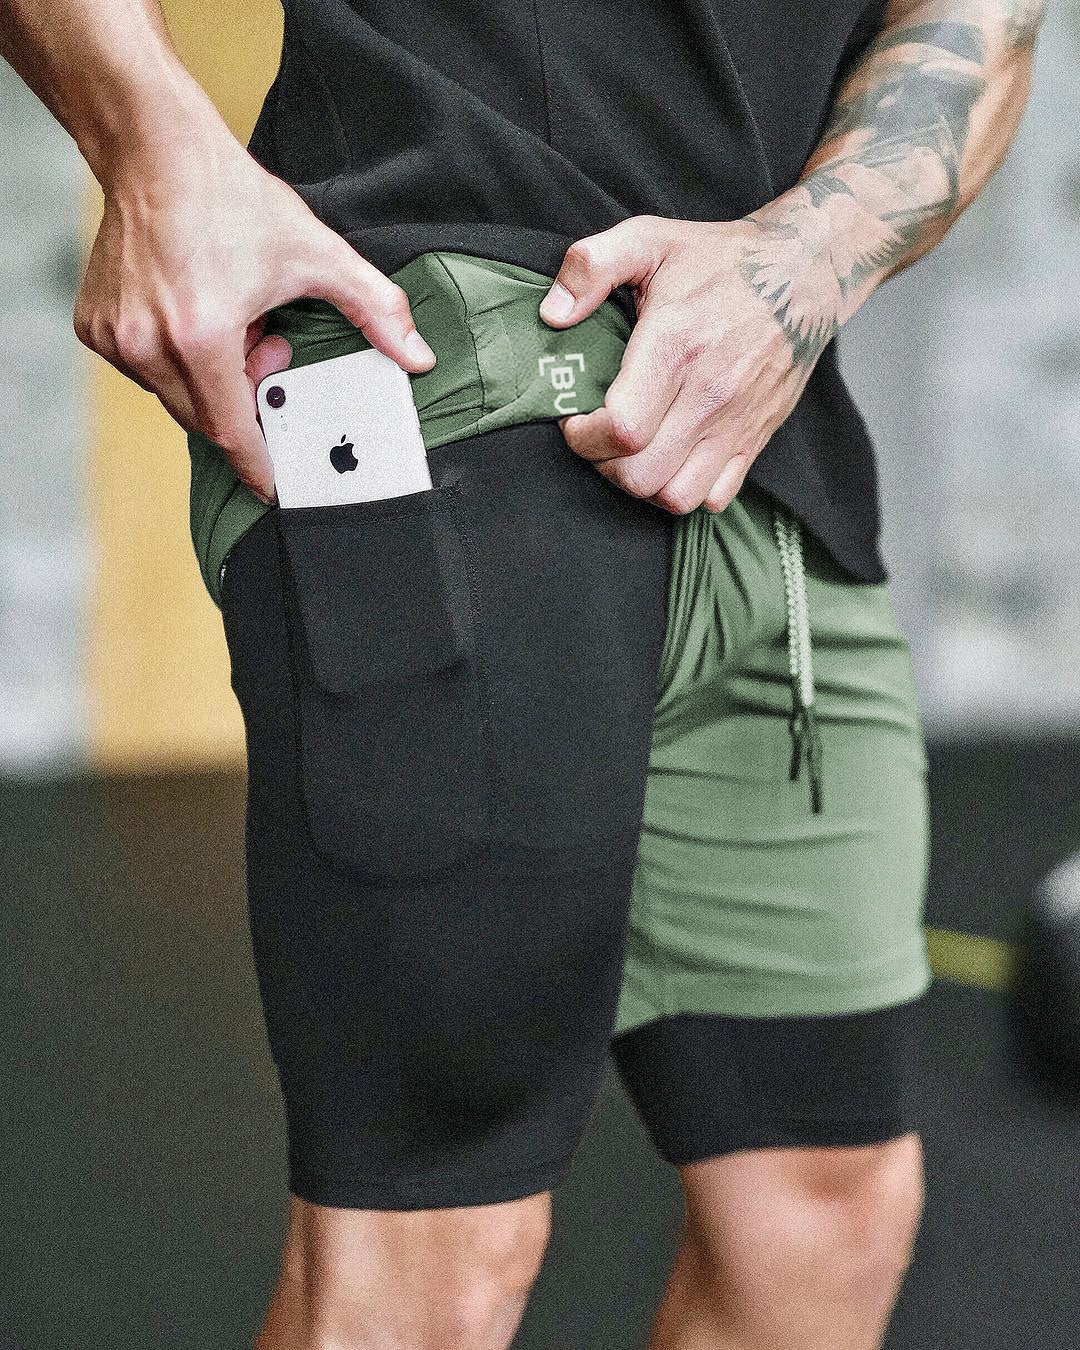 Gym Double Layer Quick Dry Shorts